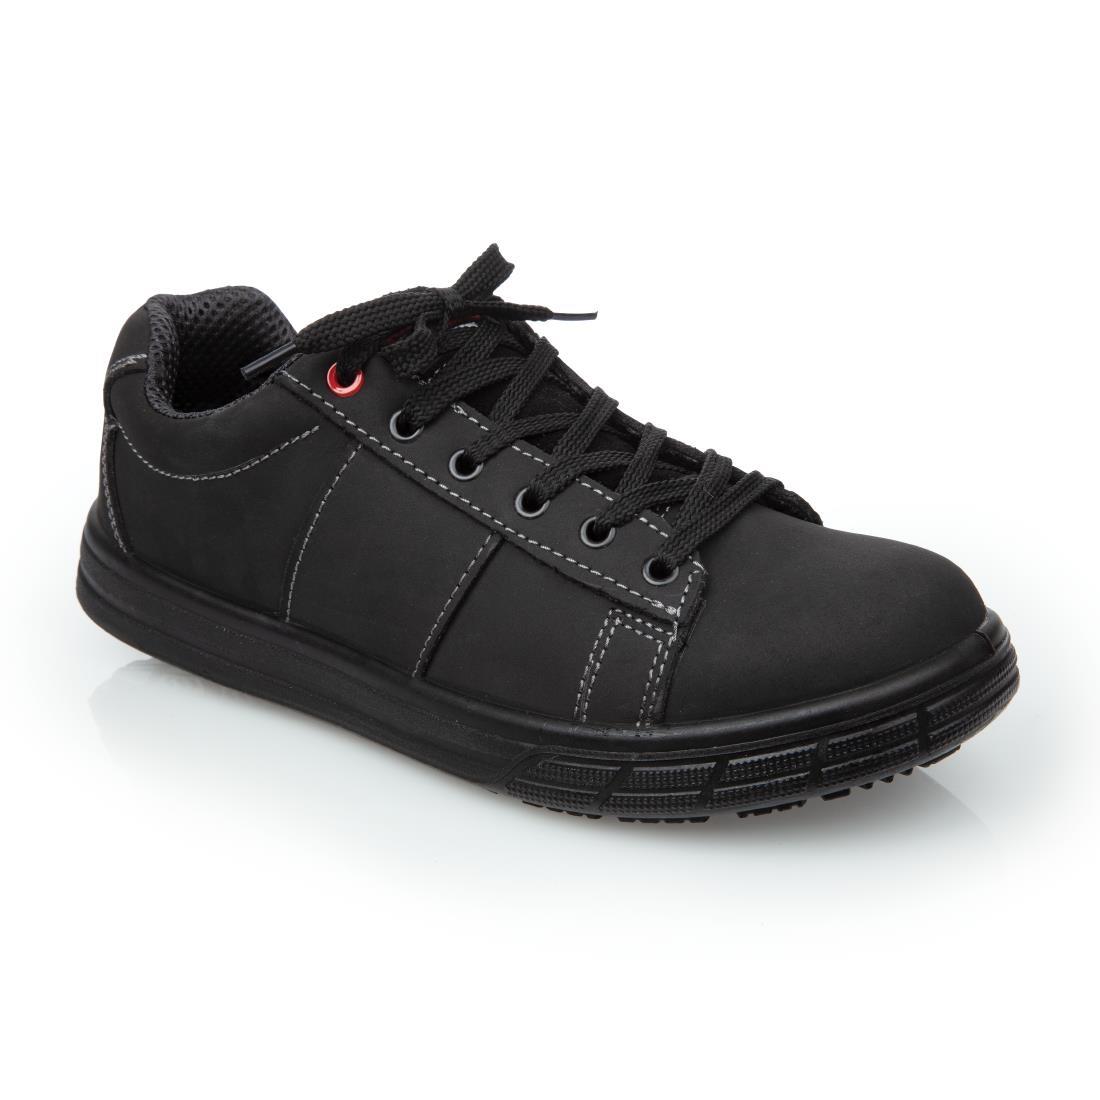 Slipbuster Safety Trainers Black 45 - BB420-45  - 1